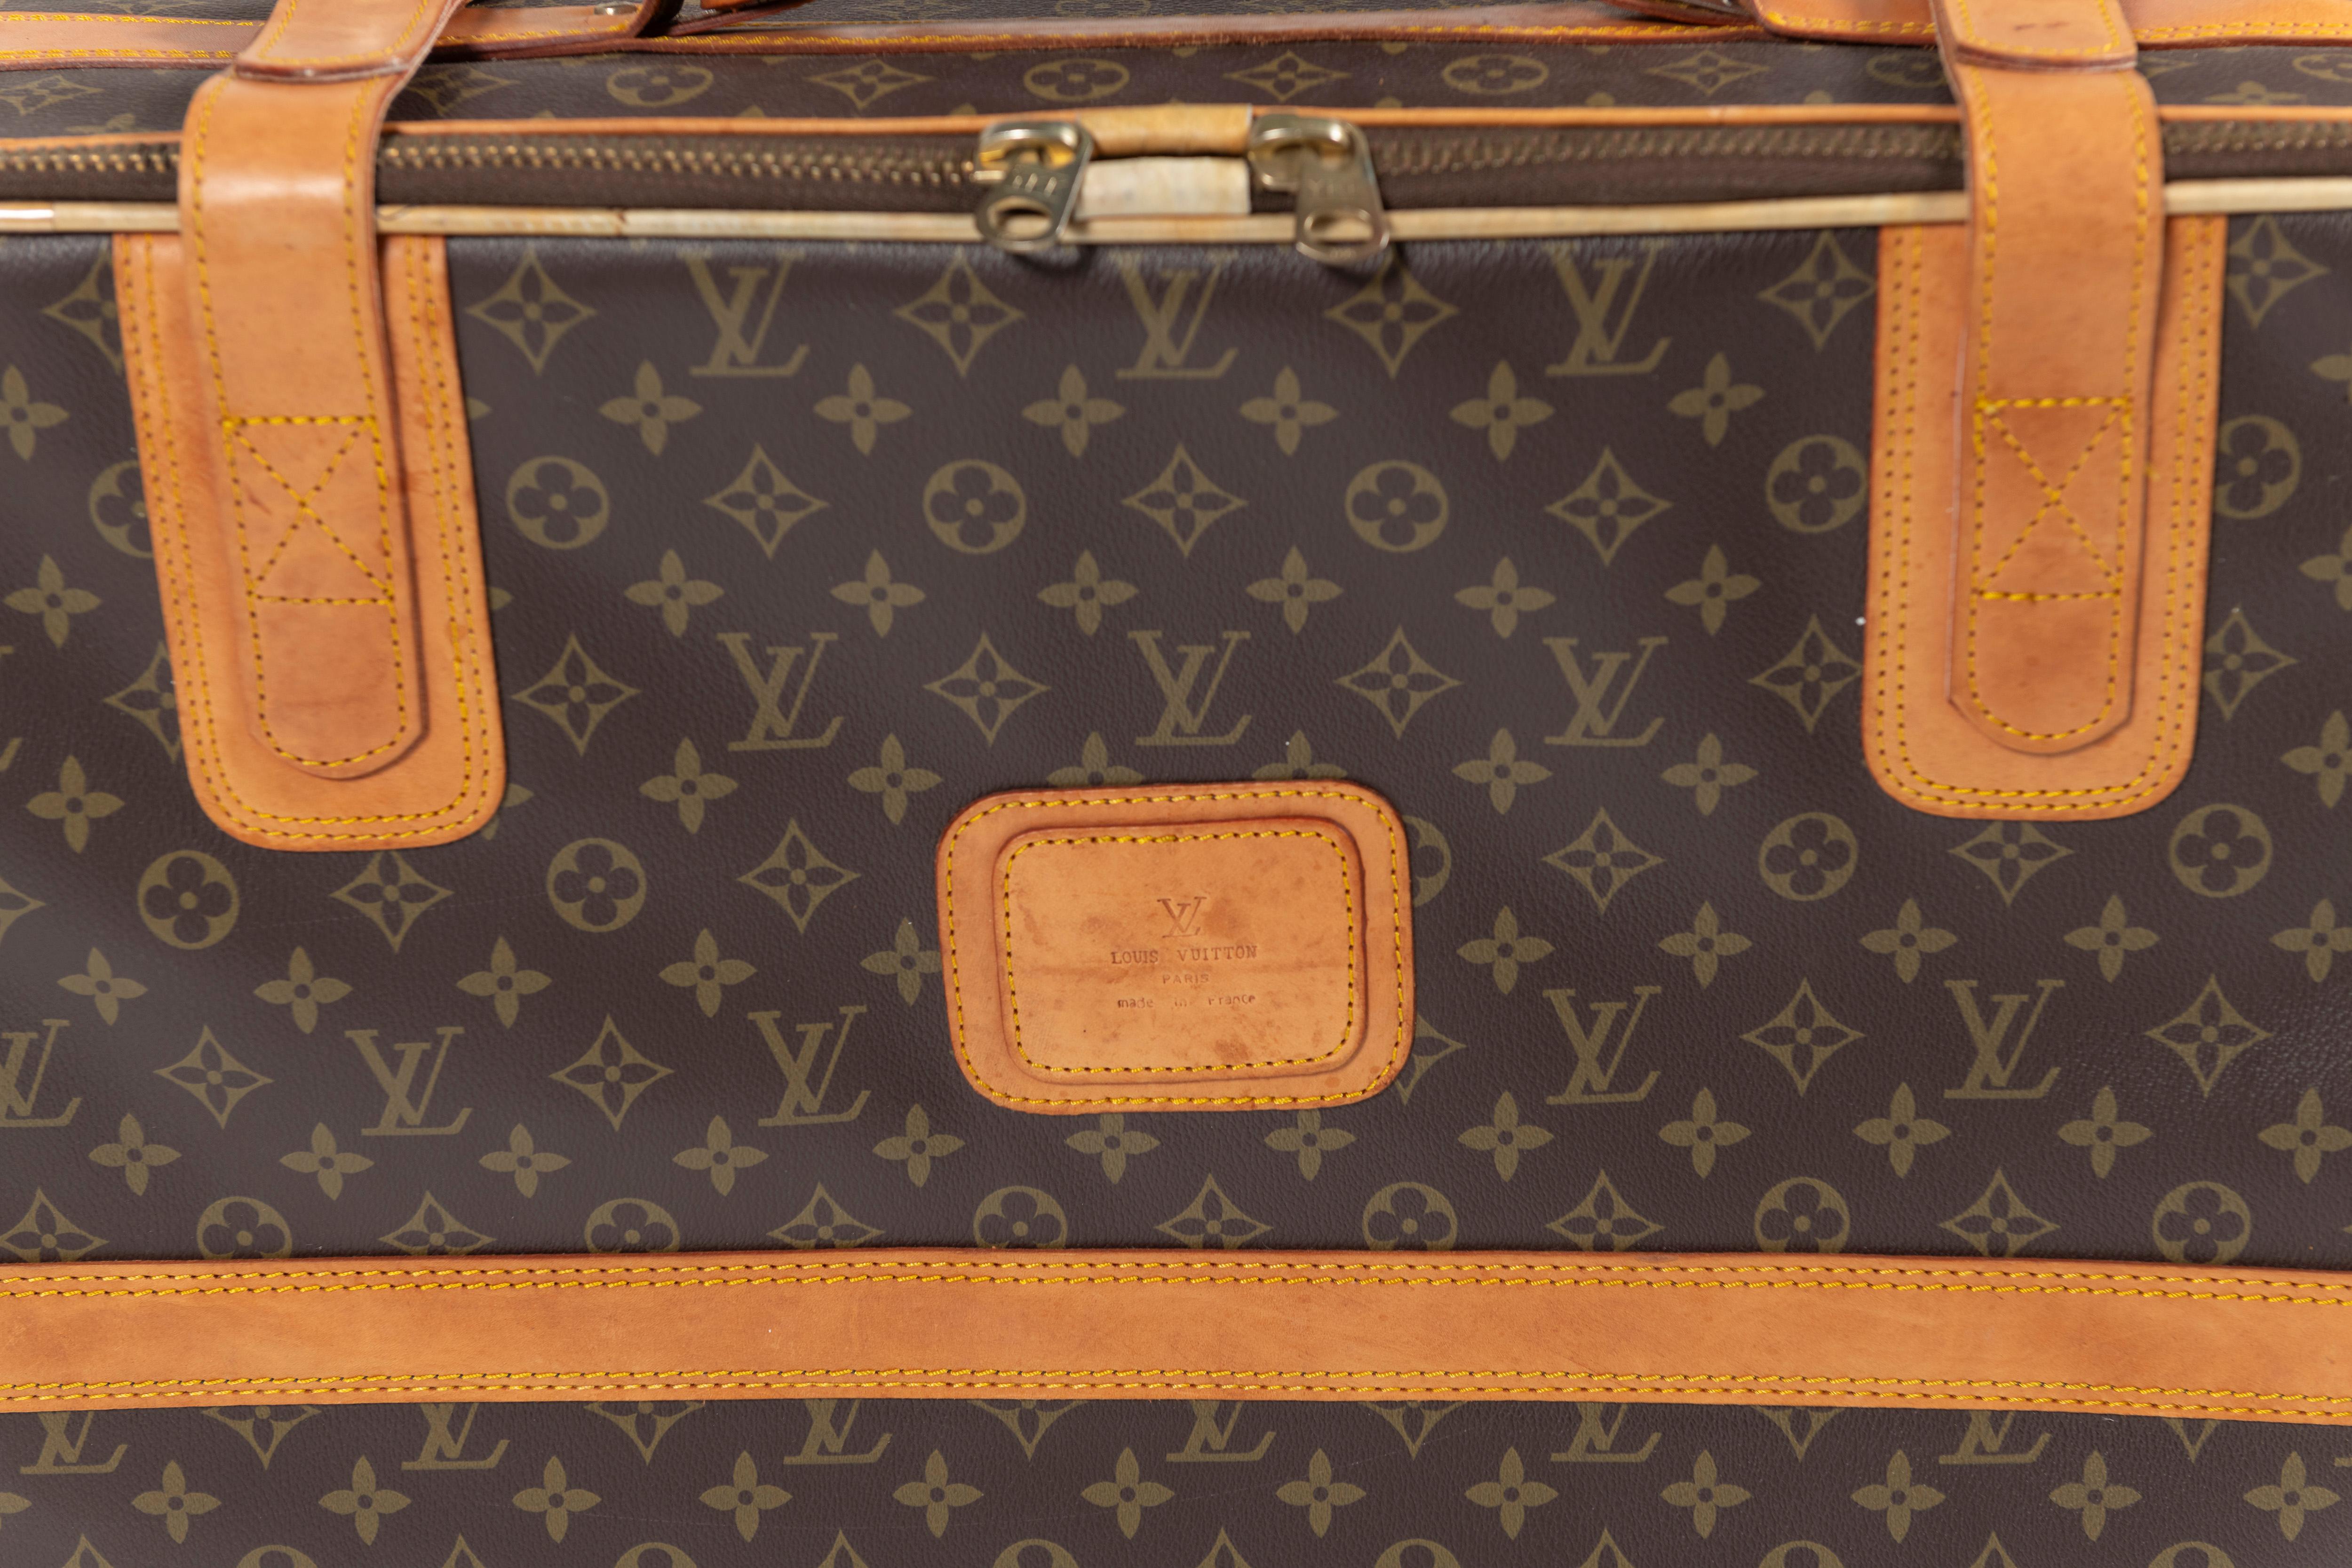 Vintage Louis Vuitton Suitcase, Monogrammed Coated Canvas, Small-Sized In Good Condition For Sale In San Francisco, CA